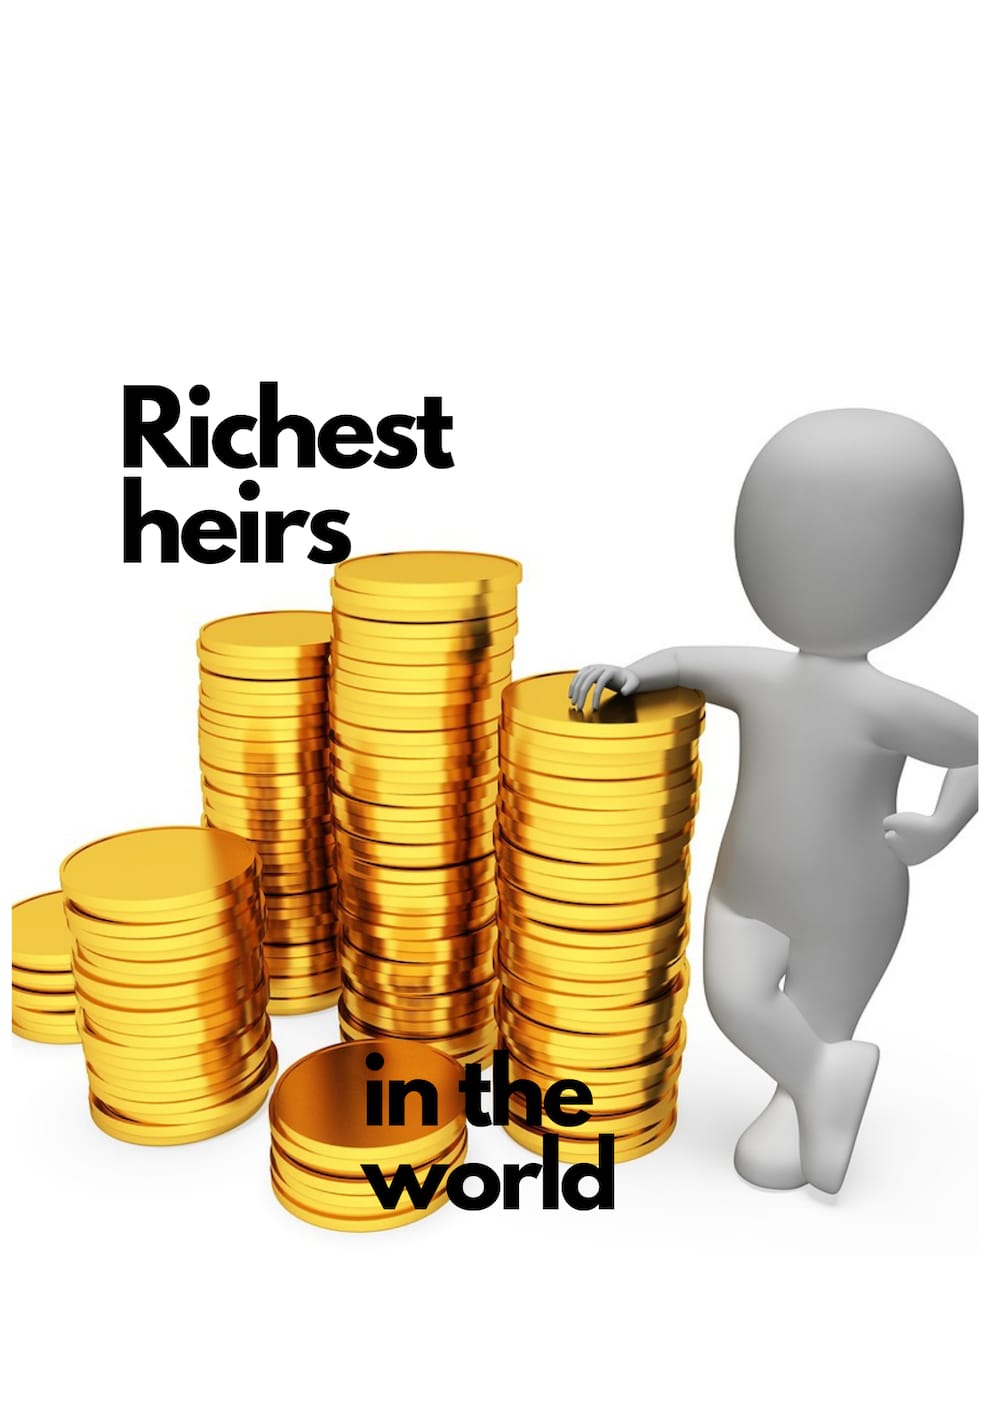 Top 20 richest heirs in the world